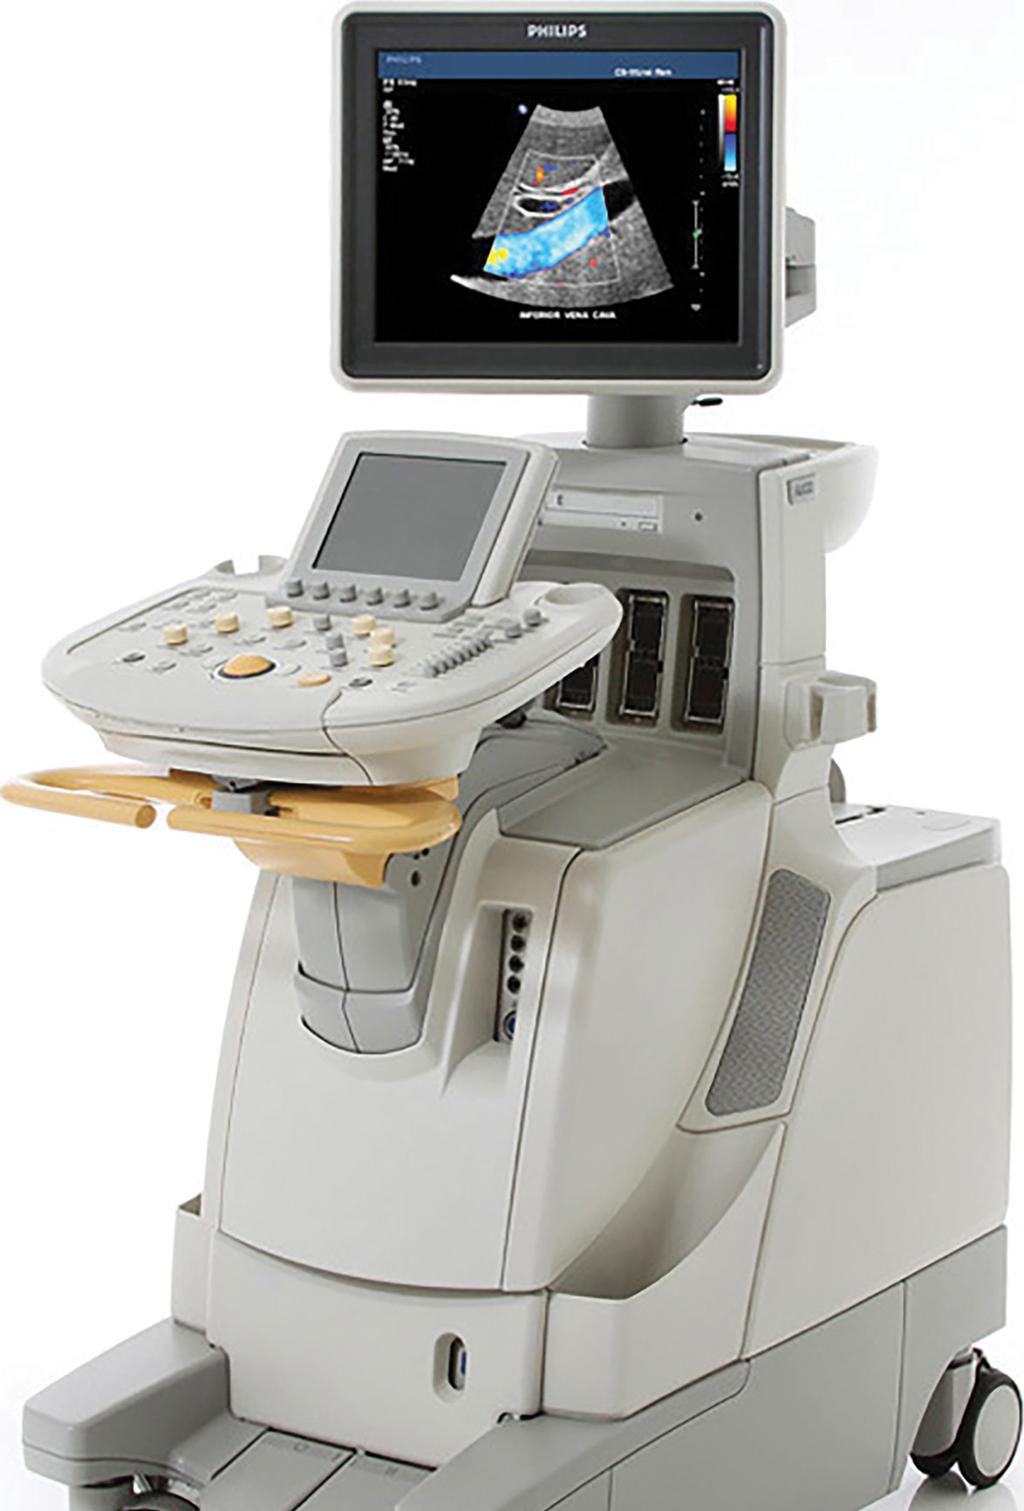 ULTRASOUND DEPARTMENT The General Radiology Department at the Al Zaabi Healthcare is equiped with high-end Ultrasound machines, enables to provide excellent care to patients.